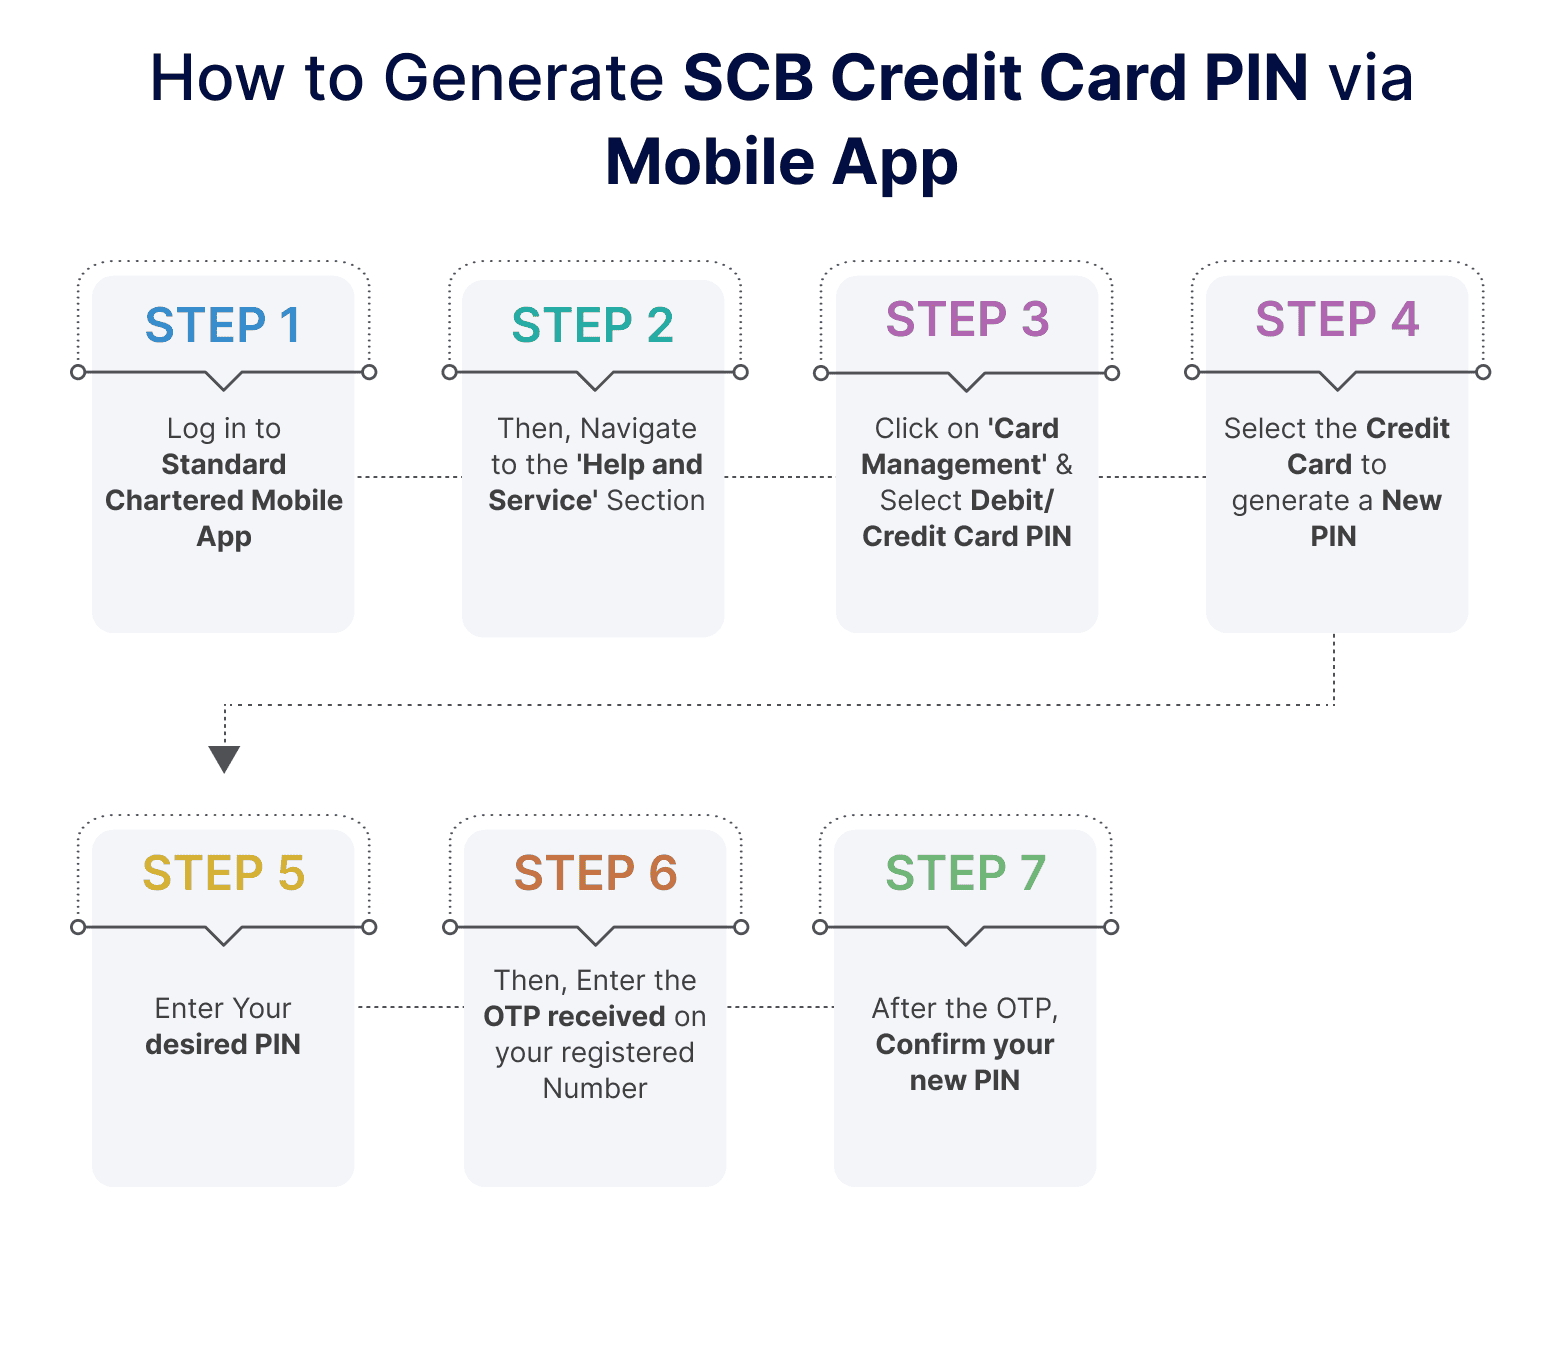 How to Generate SCB Credit Card PIN via Mobile App